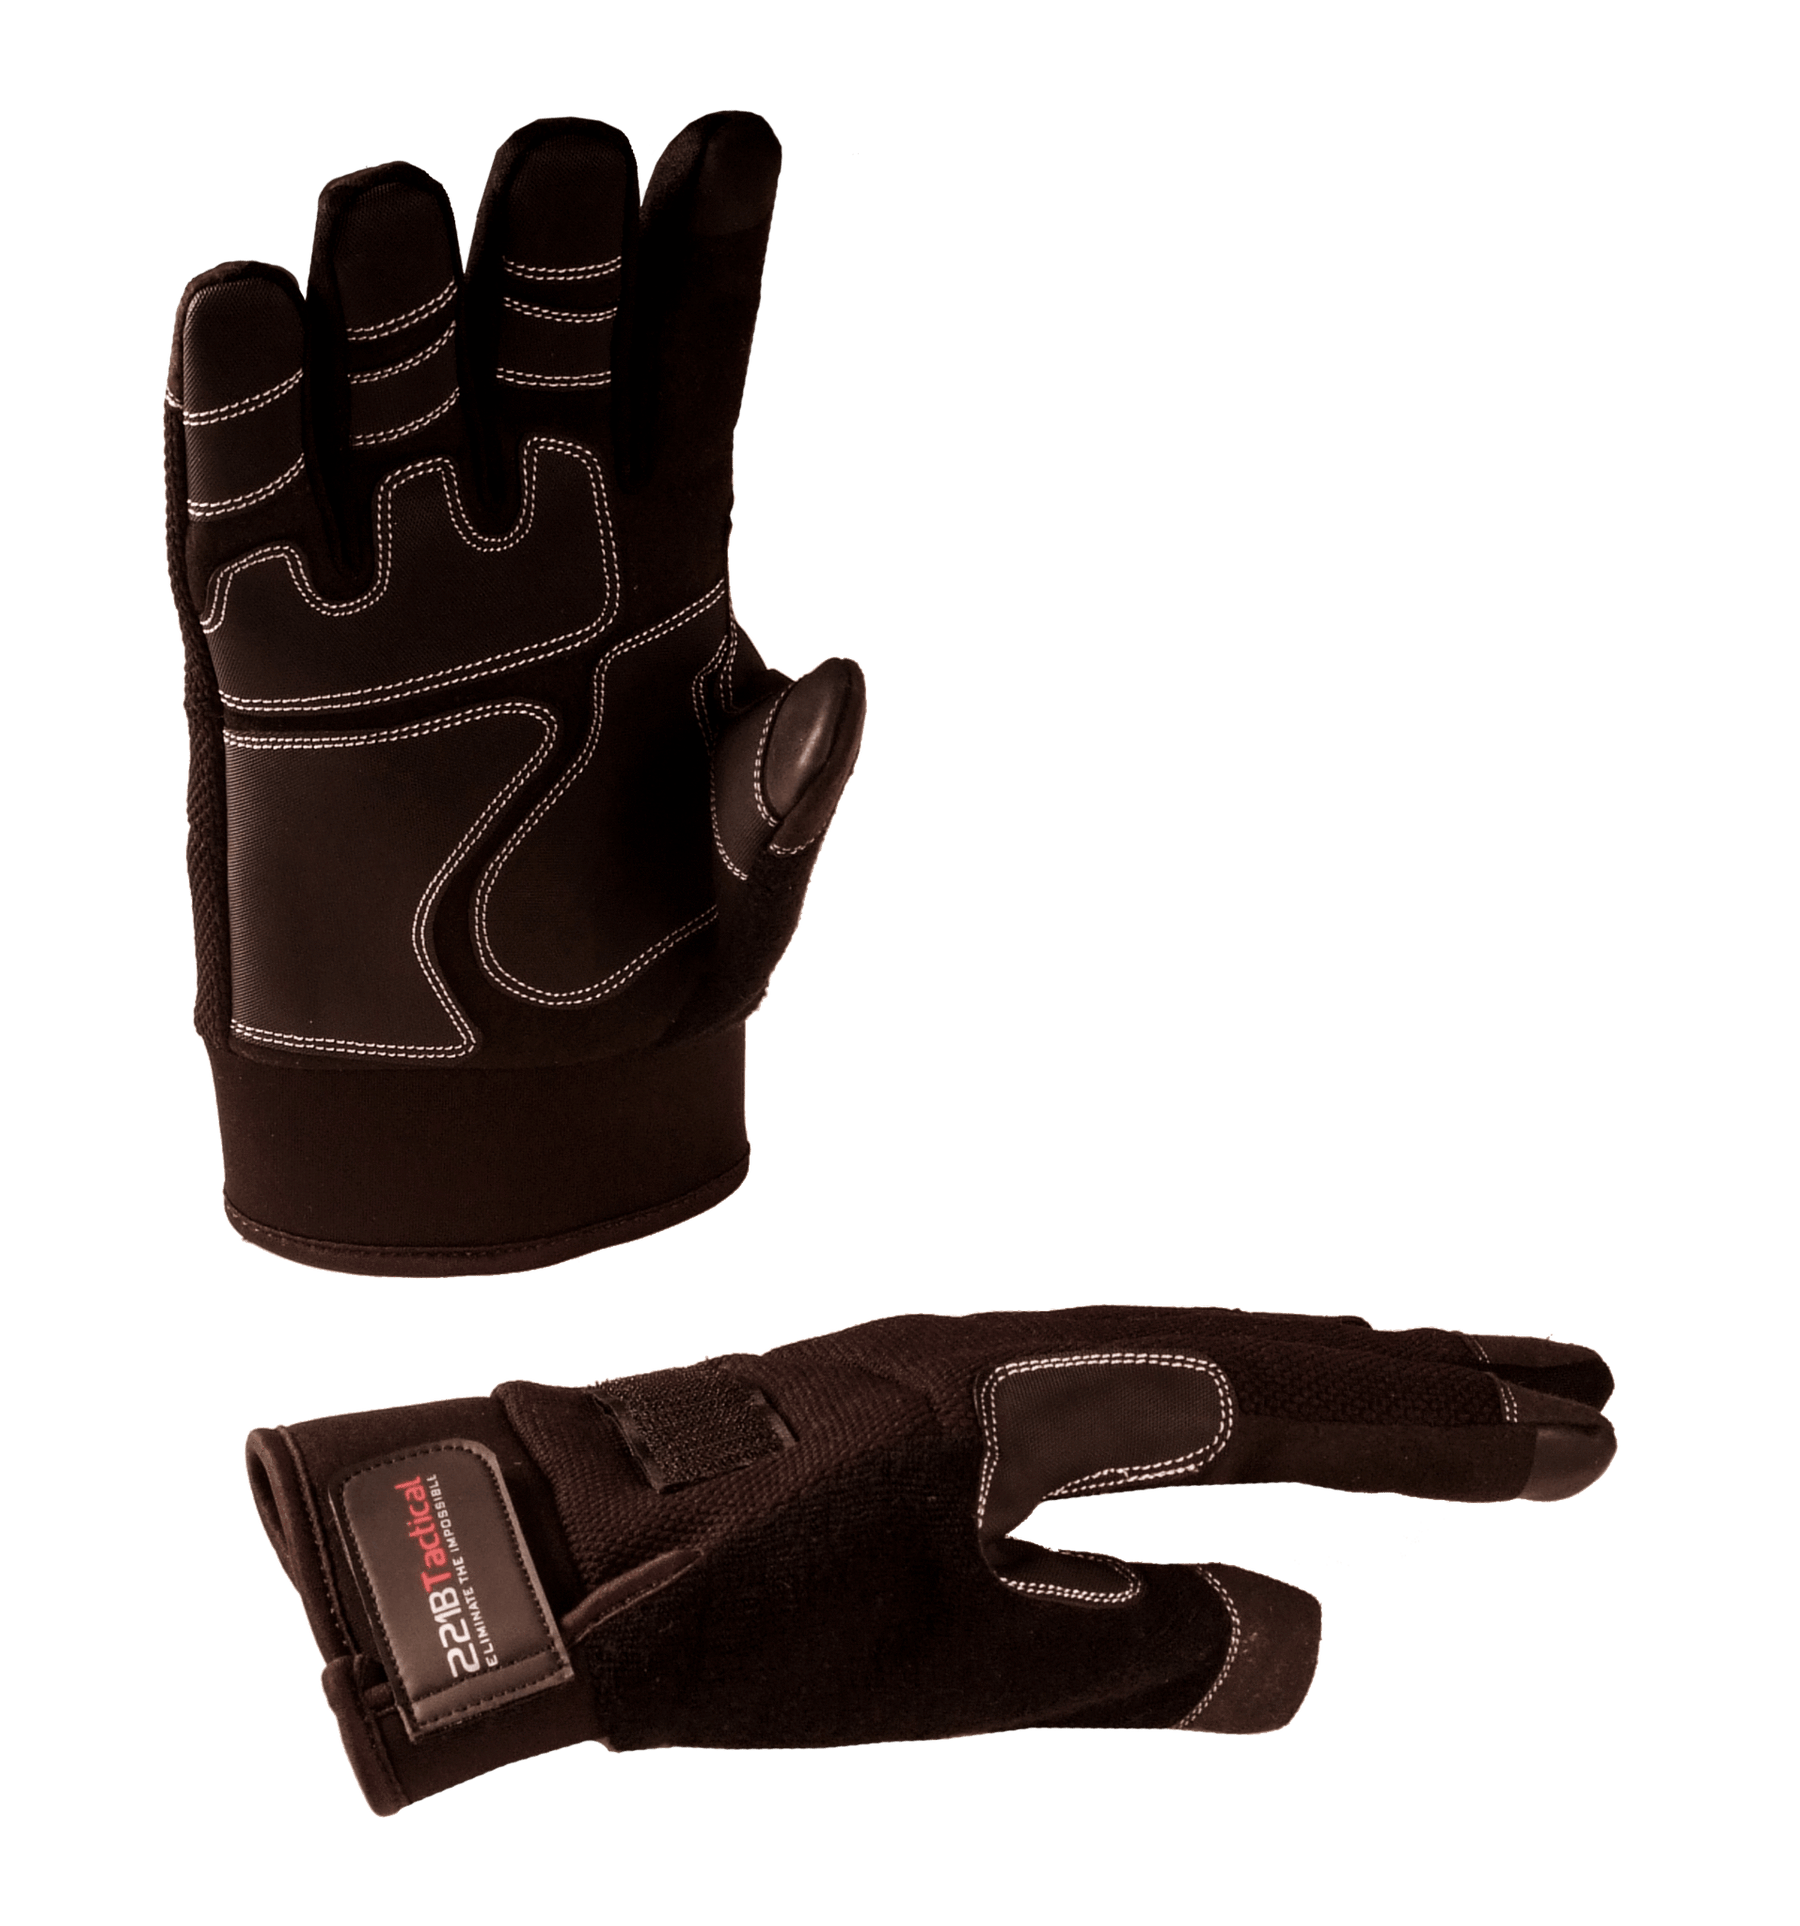 Why can't winter gloves keep your hands WARM & DRY?